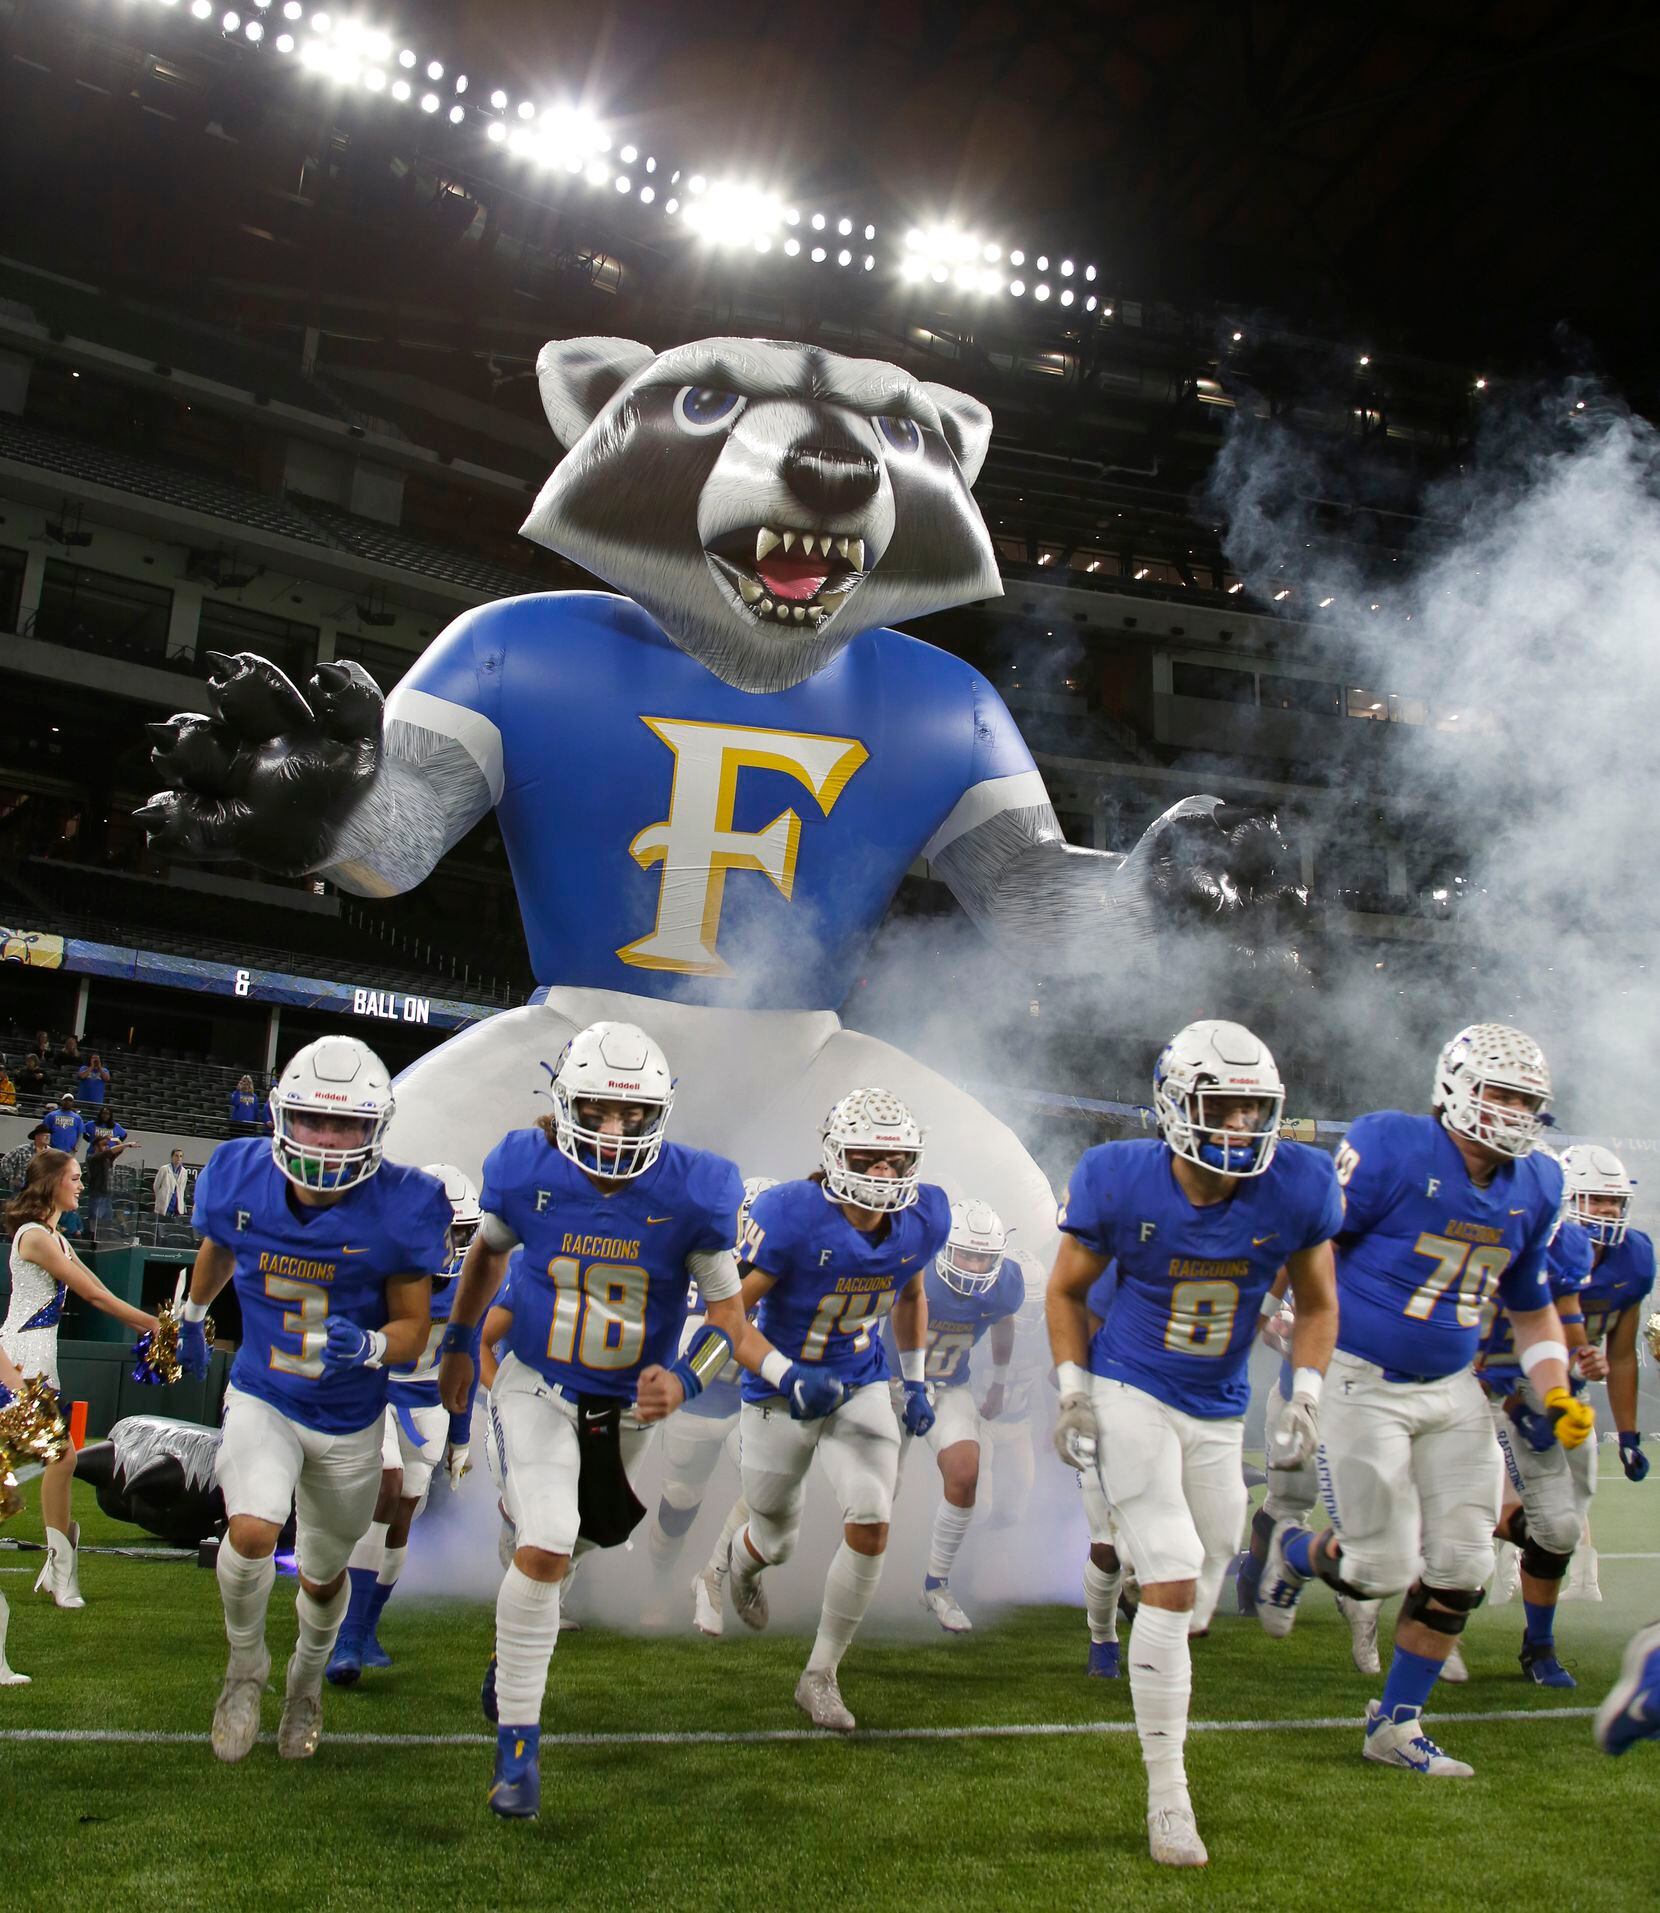 Frisco players run onto the field from their mascot inflatable before the start of their...